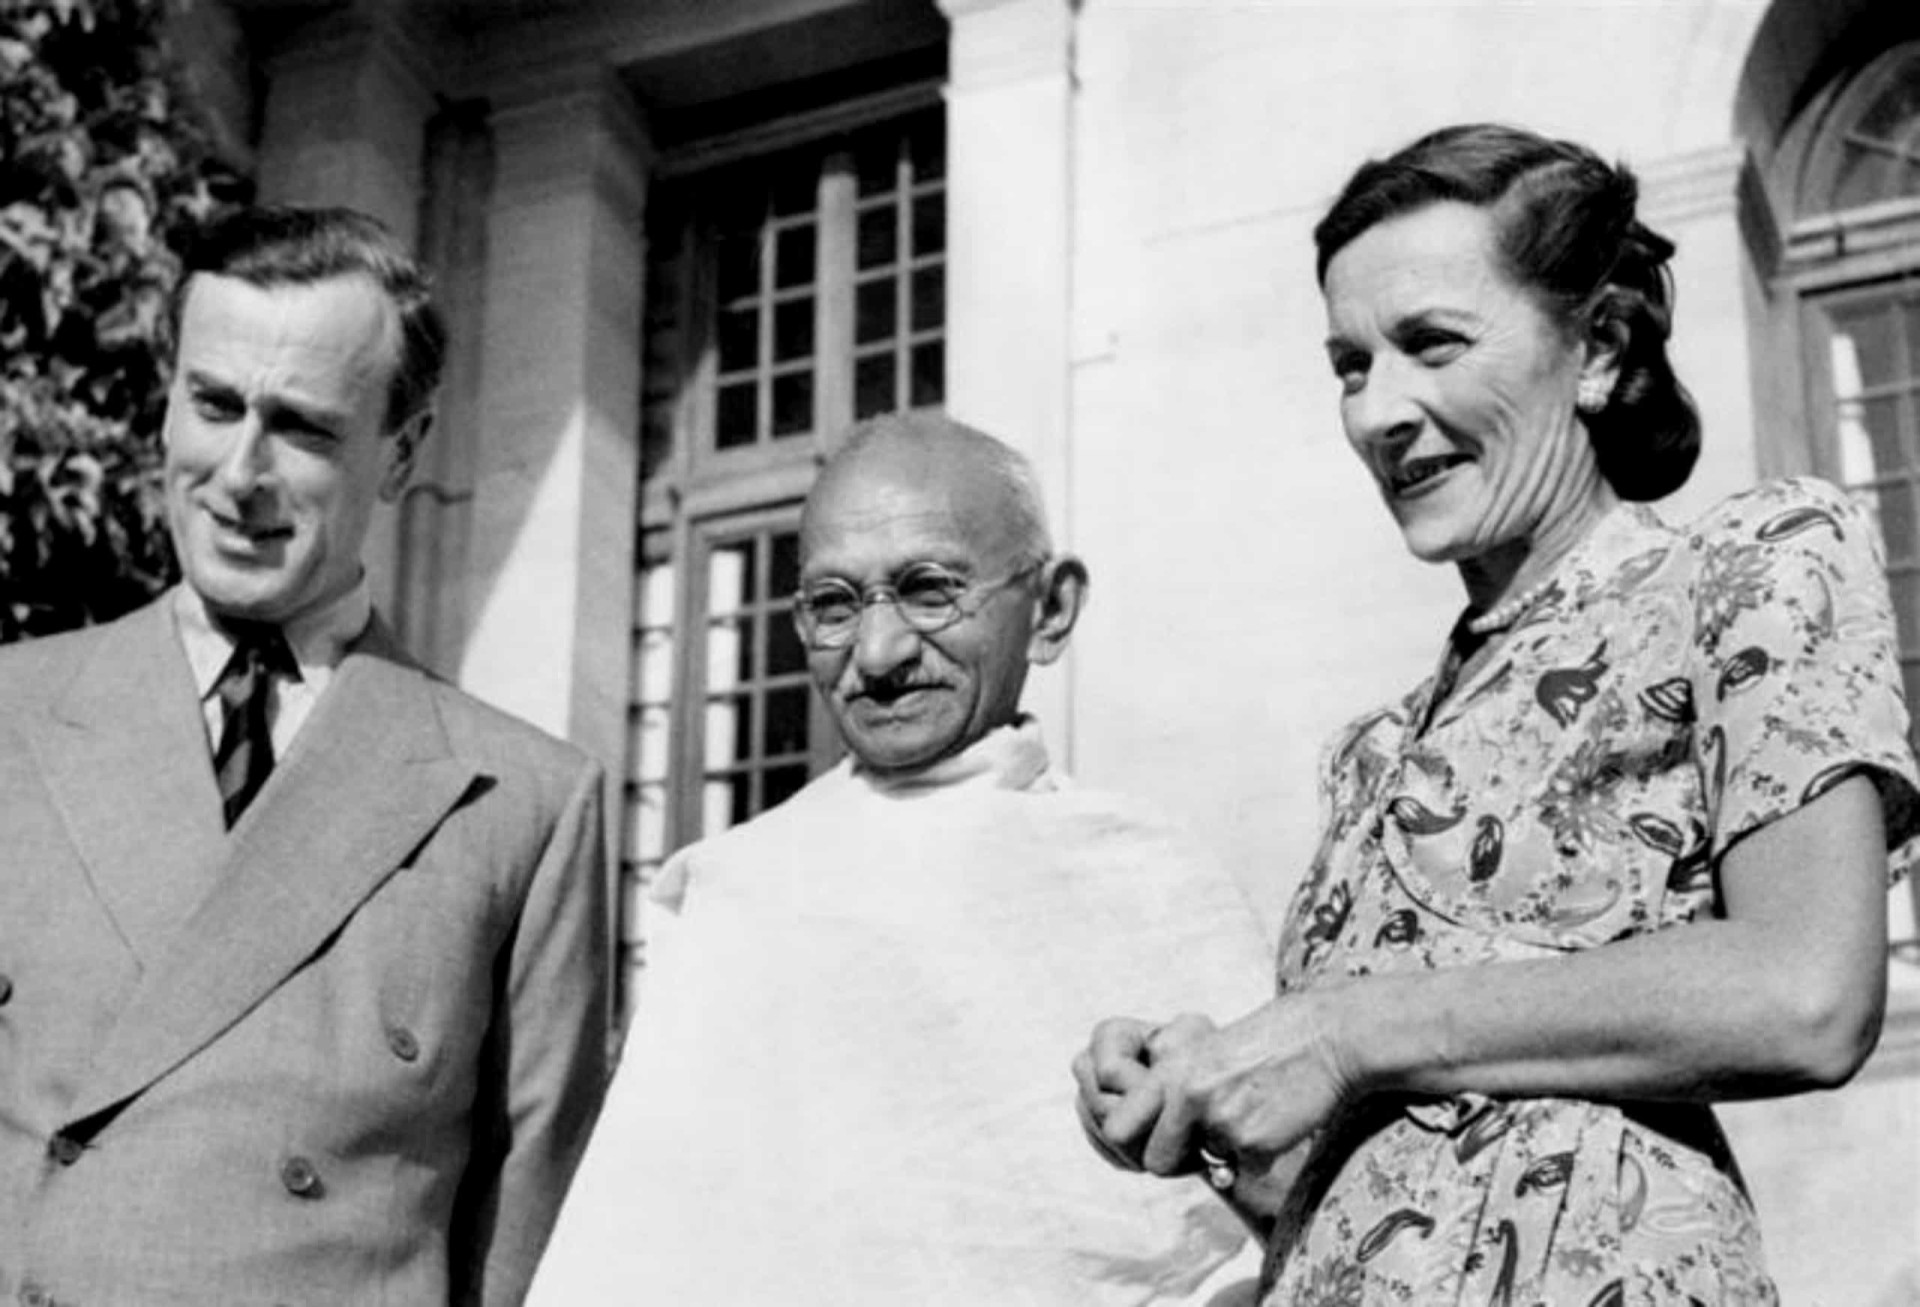 <p>Archibald Wavell, the Viceroy and Governor-General of British India, worked with Gandhi and Jinnah to find a common ground. Eventually the British reluctantly agreed to grant independence to the people of the Indian subcontinent, but also accepted Jinnah's proposal of partitioning the land into Pakistan and India. After Wavell retired, Lord Louis Mountbatten became Britain's last Viceroy of India and the first governor-general of independent India (1947–1948). He's pictured here with his wife, Edwina, and Gandhi in 1947. </p><p>You may also like:<a href="https://www.starsinsider.com/n/497418?utm_source=msn.com&utm_medium=display&utm_campaign=referral_description&utm_content=447666v5en-us"> Unsolved mysteries of the universe that have puzzled scientists for centuries</a></p>